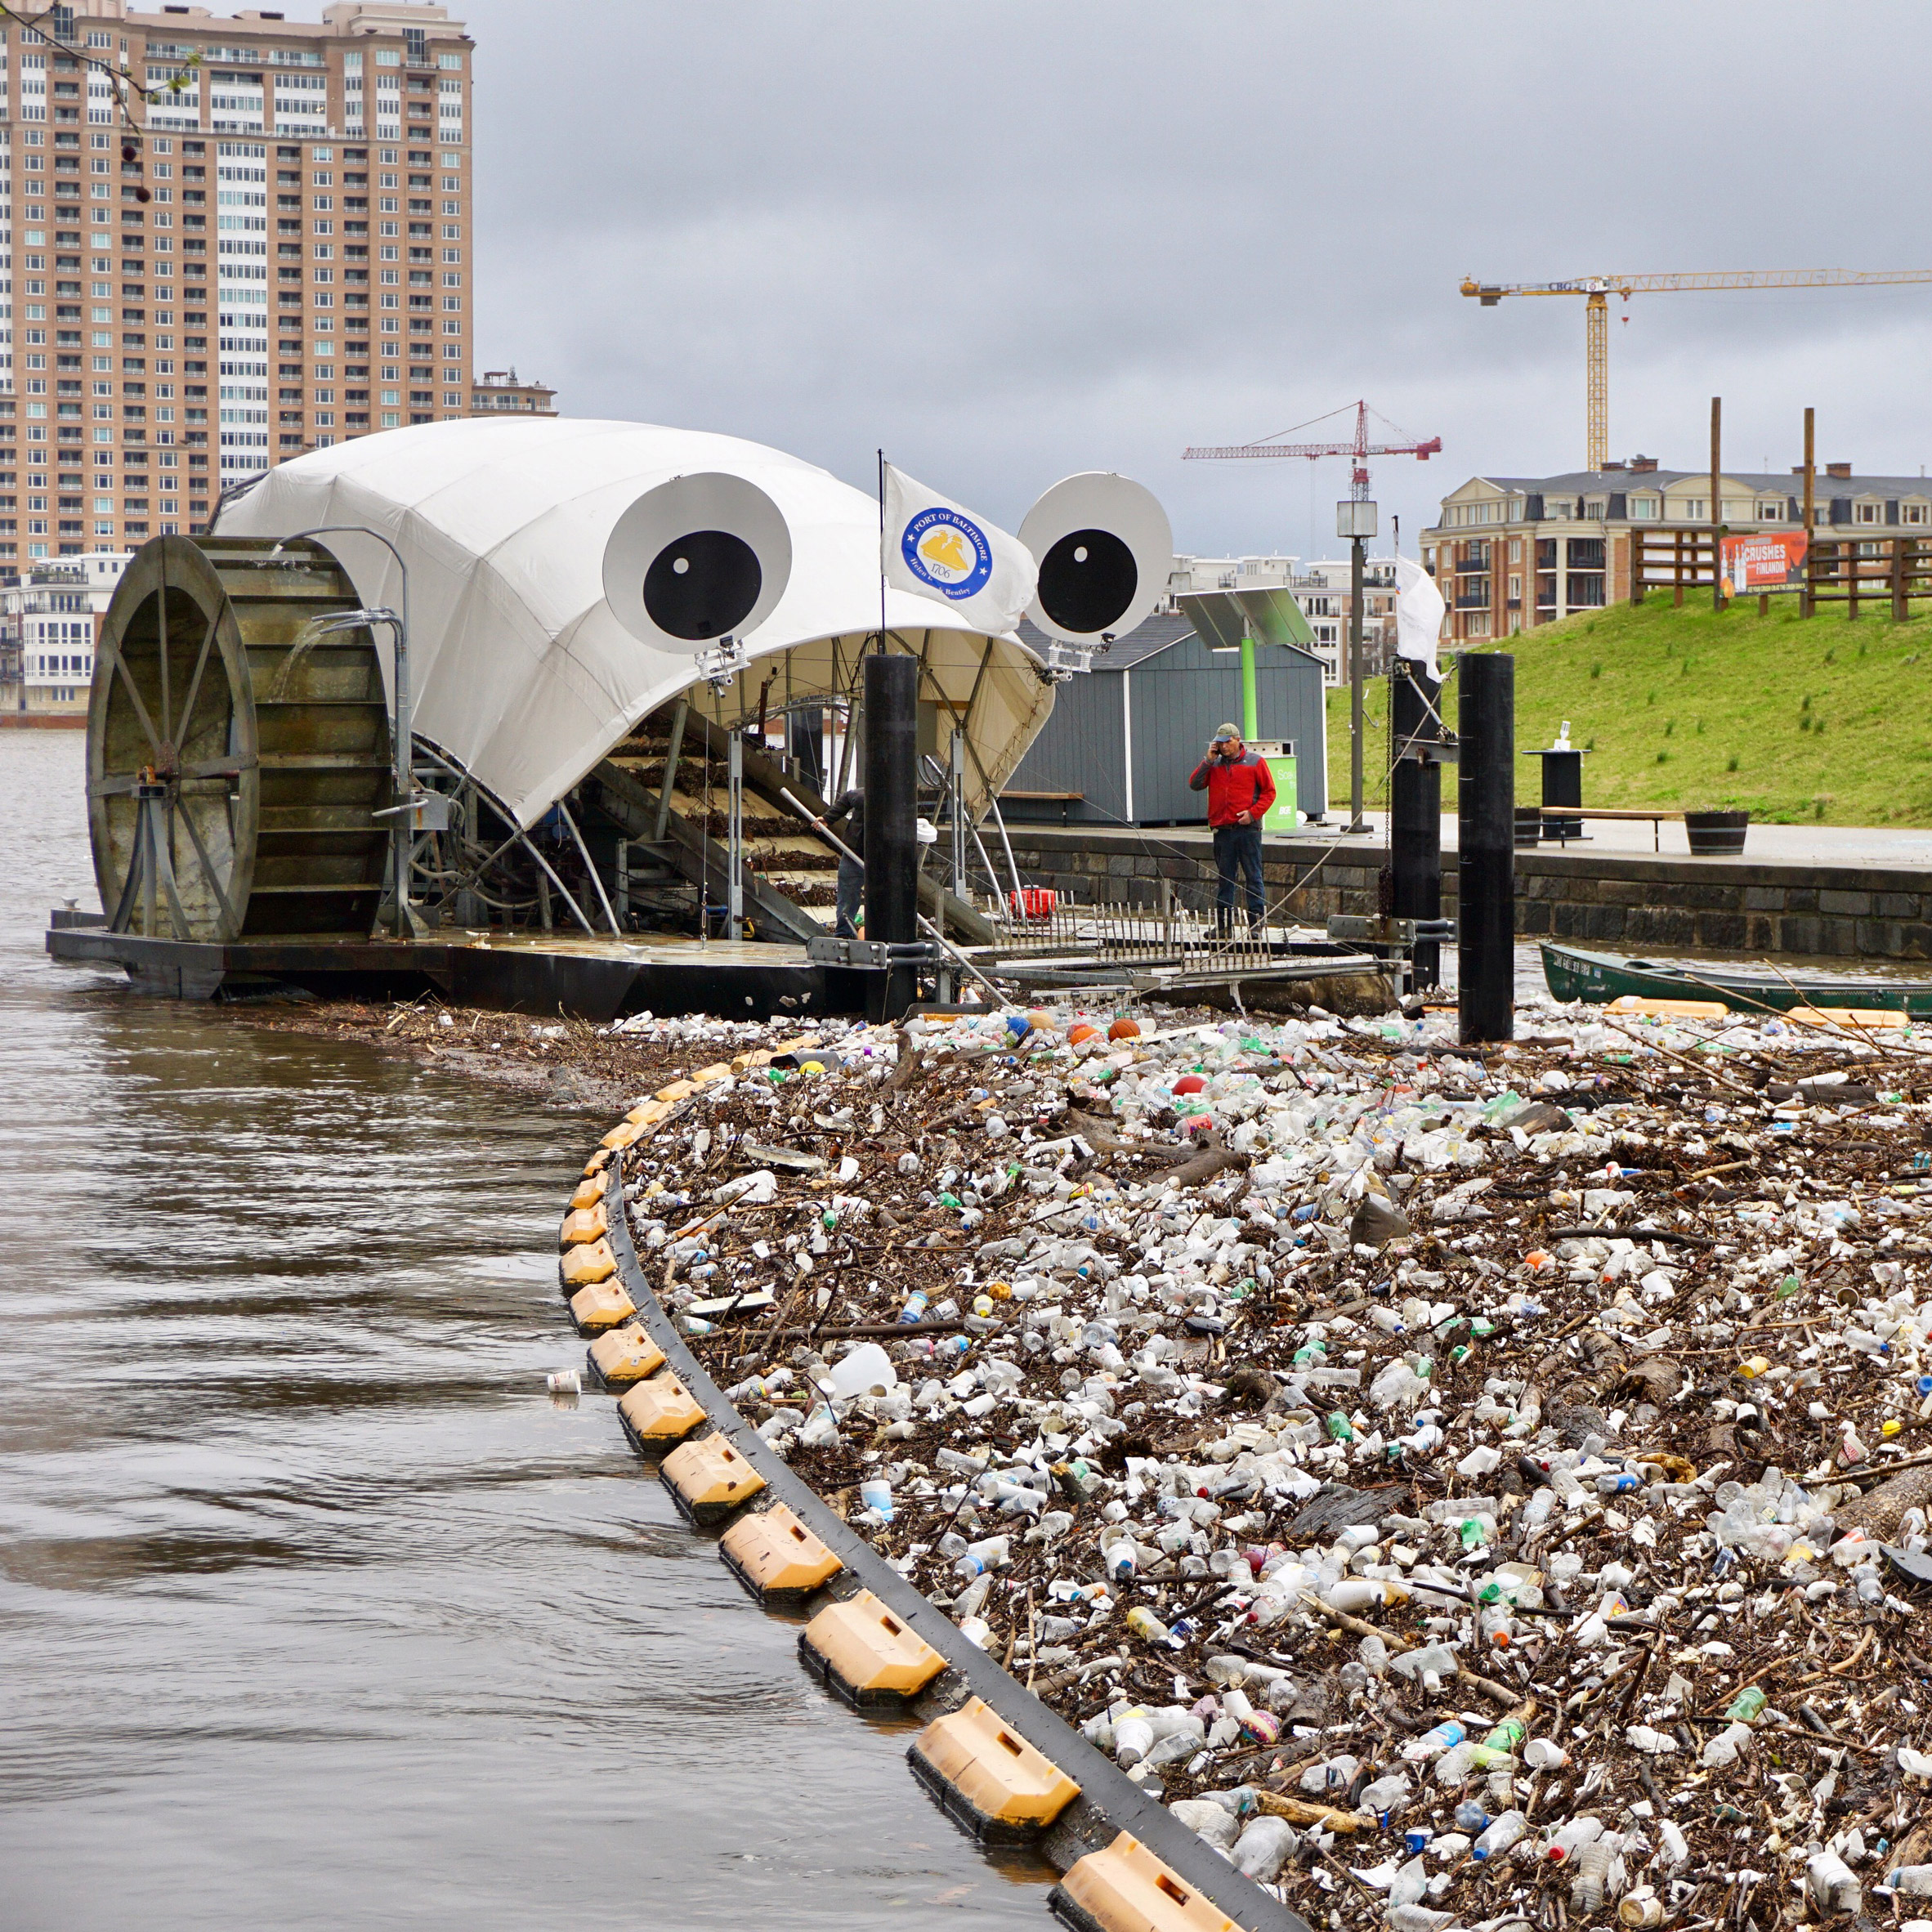 Can Designers Assist in the Eradication of Waste?